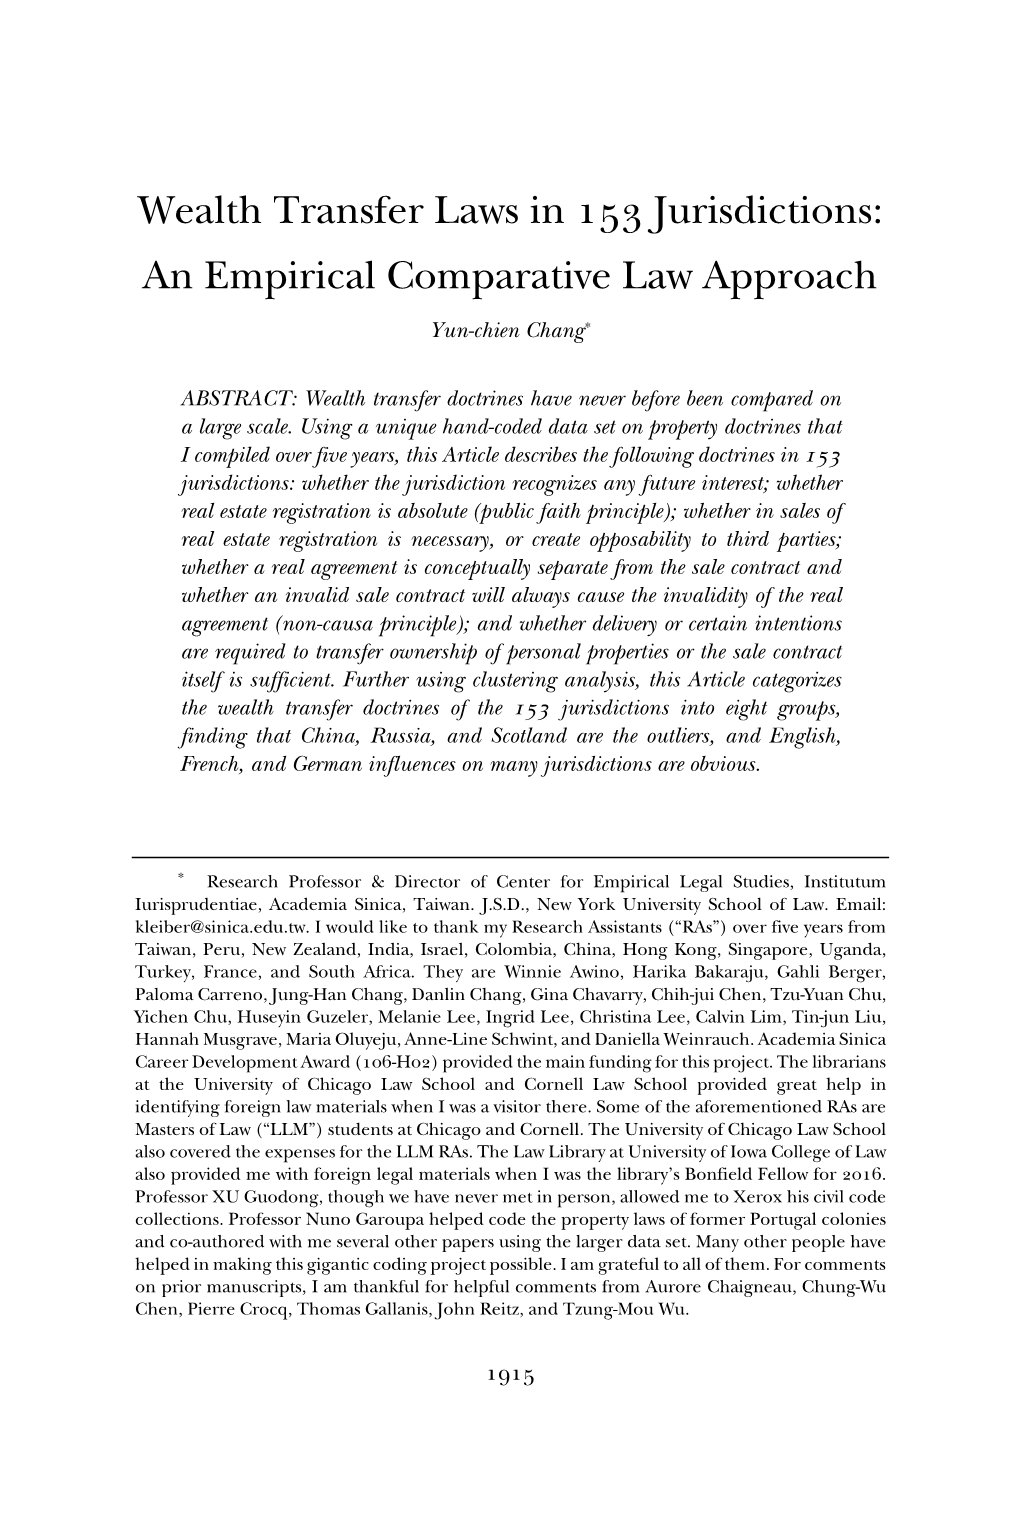 Wealth Transfer Laws in 153 Jurisdictions: an Empirical Comparative Law Approach